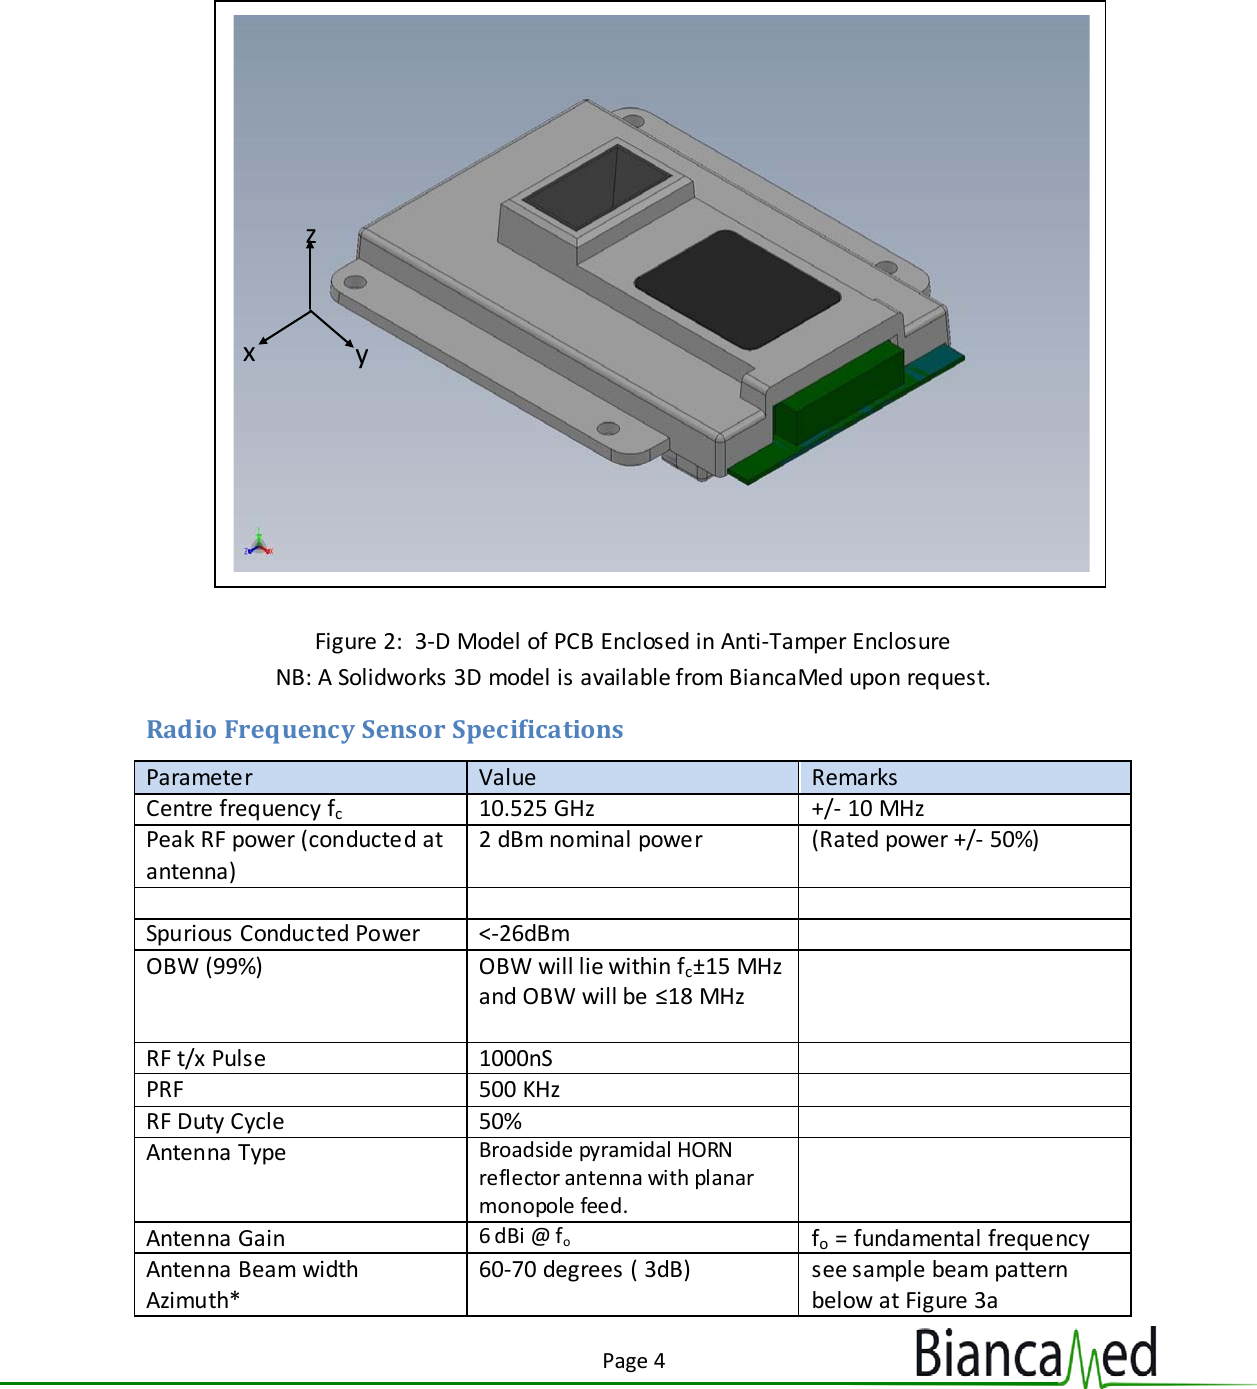 Page 4   Figure 2:  3-D Model of PCB Enclosed in Anti-Tamper Enclosure NB: A Solidworks 3D model is available from BiancaMed upon request. Radio Frequency Sensor Specifications Parameter Value Remarks Centre frequency fc 10.525 GHz +/- 10 MHz Peak RF power (conducted at antenna)  2 dBm nominal power (Rated power +/- 50%)    Spurious Conducted Power  &lt;-26dBm   OBW (99%) OBW will lie within fc±15 MHz and OBW will be ≤18 MHz   RF t/x Pulse 1000nS   PRF 500 KHz   RF Duty Cycle 50%   Antenna Type  Broadside pyramidal HORN reflector antenna with planar monopole feed.   Antenna Gain 6 dBi @ fo fo = fundamental frequency Antenna Beam width Azimuth*  60-70 degrees ( 3dB) see sample beam pattern below at Figure 3a  x y z 